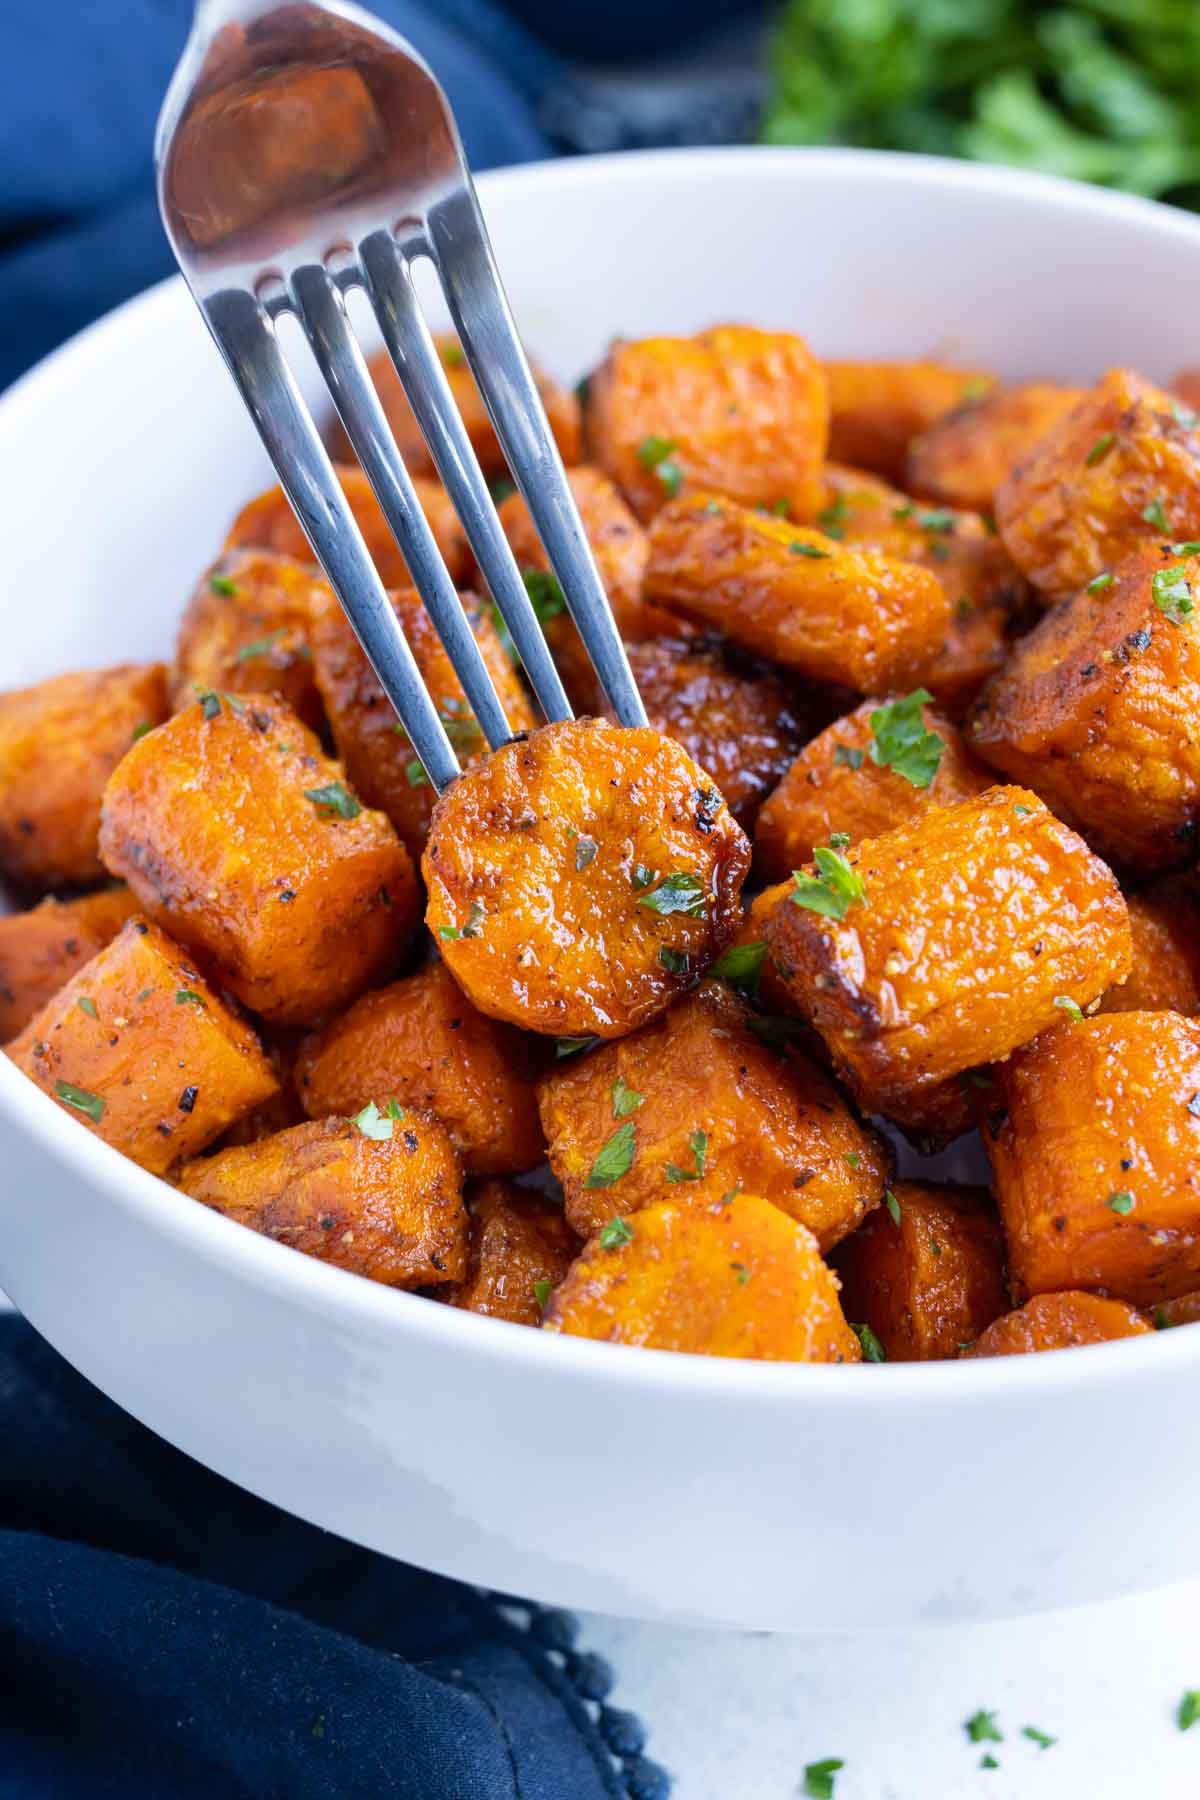 Healthy and delicious air fryer carrots are easy to make.